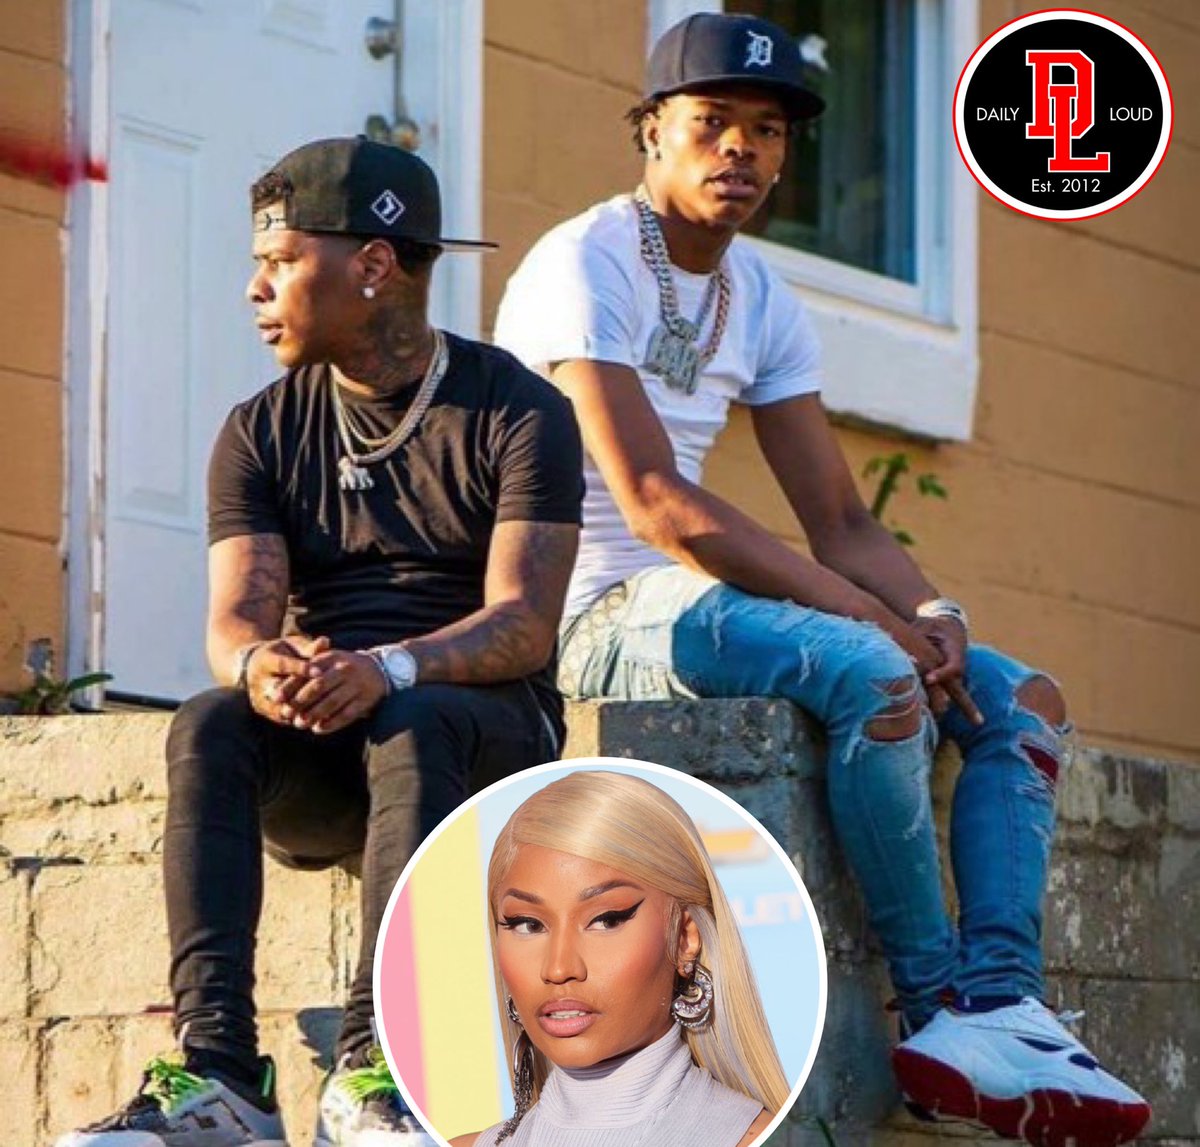 Lil Baby and Rylo Rodriguez say that Nicki Minaj is the GOAT female rapper 🐐